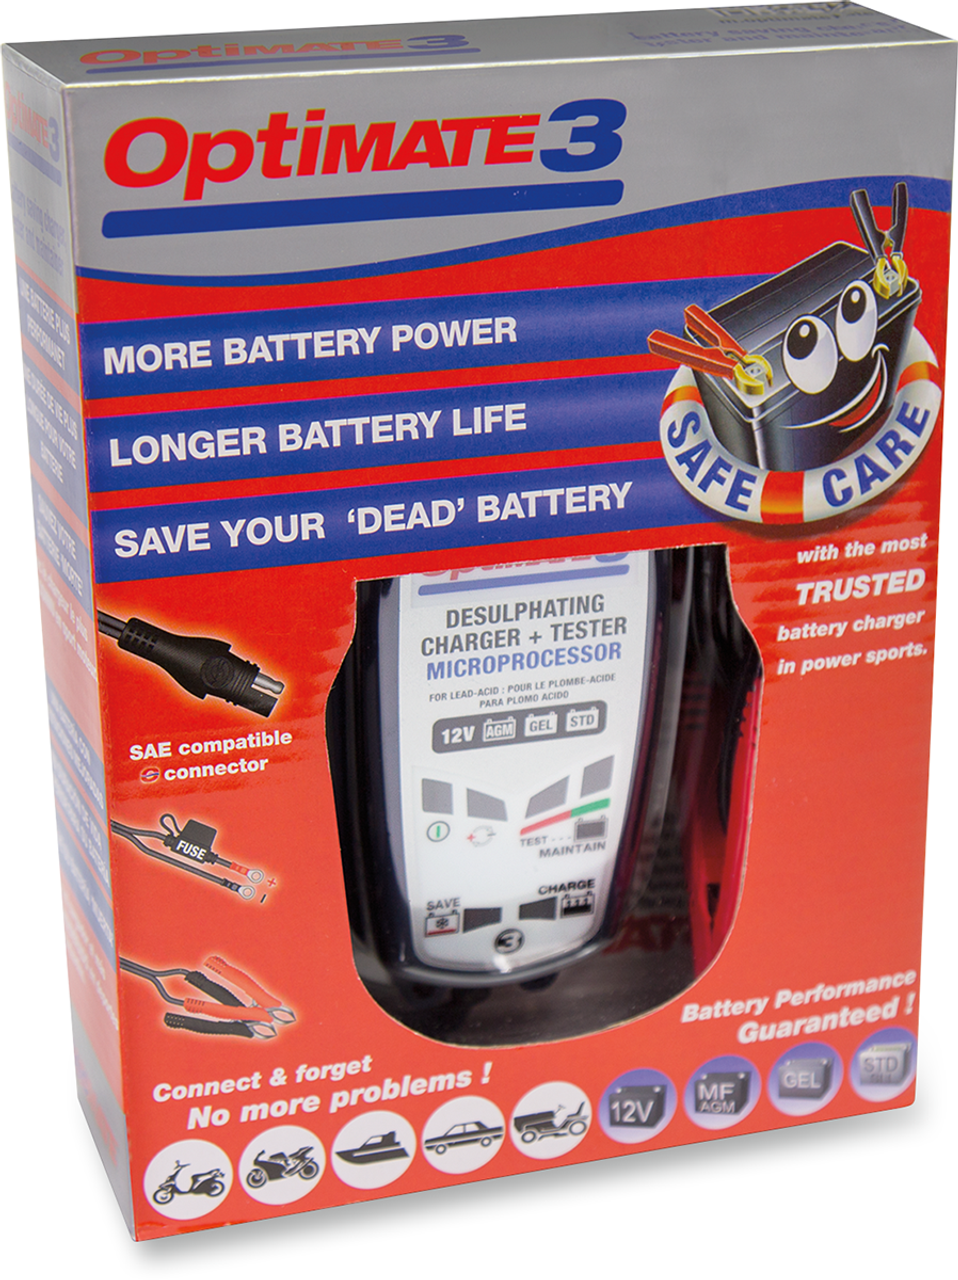 OptiMate-3 Battery Charger When You Have A Problem, Batteries